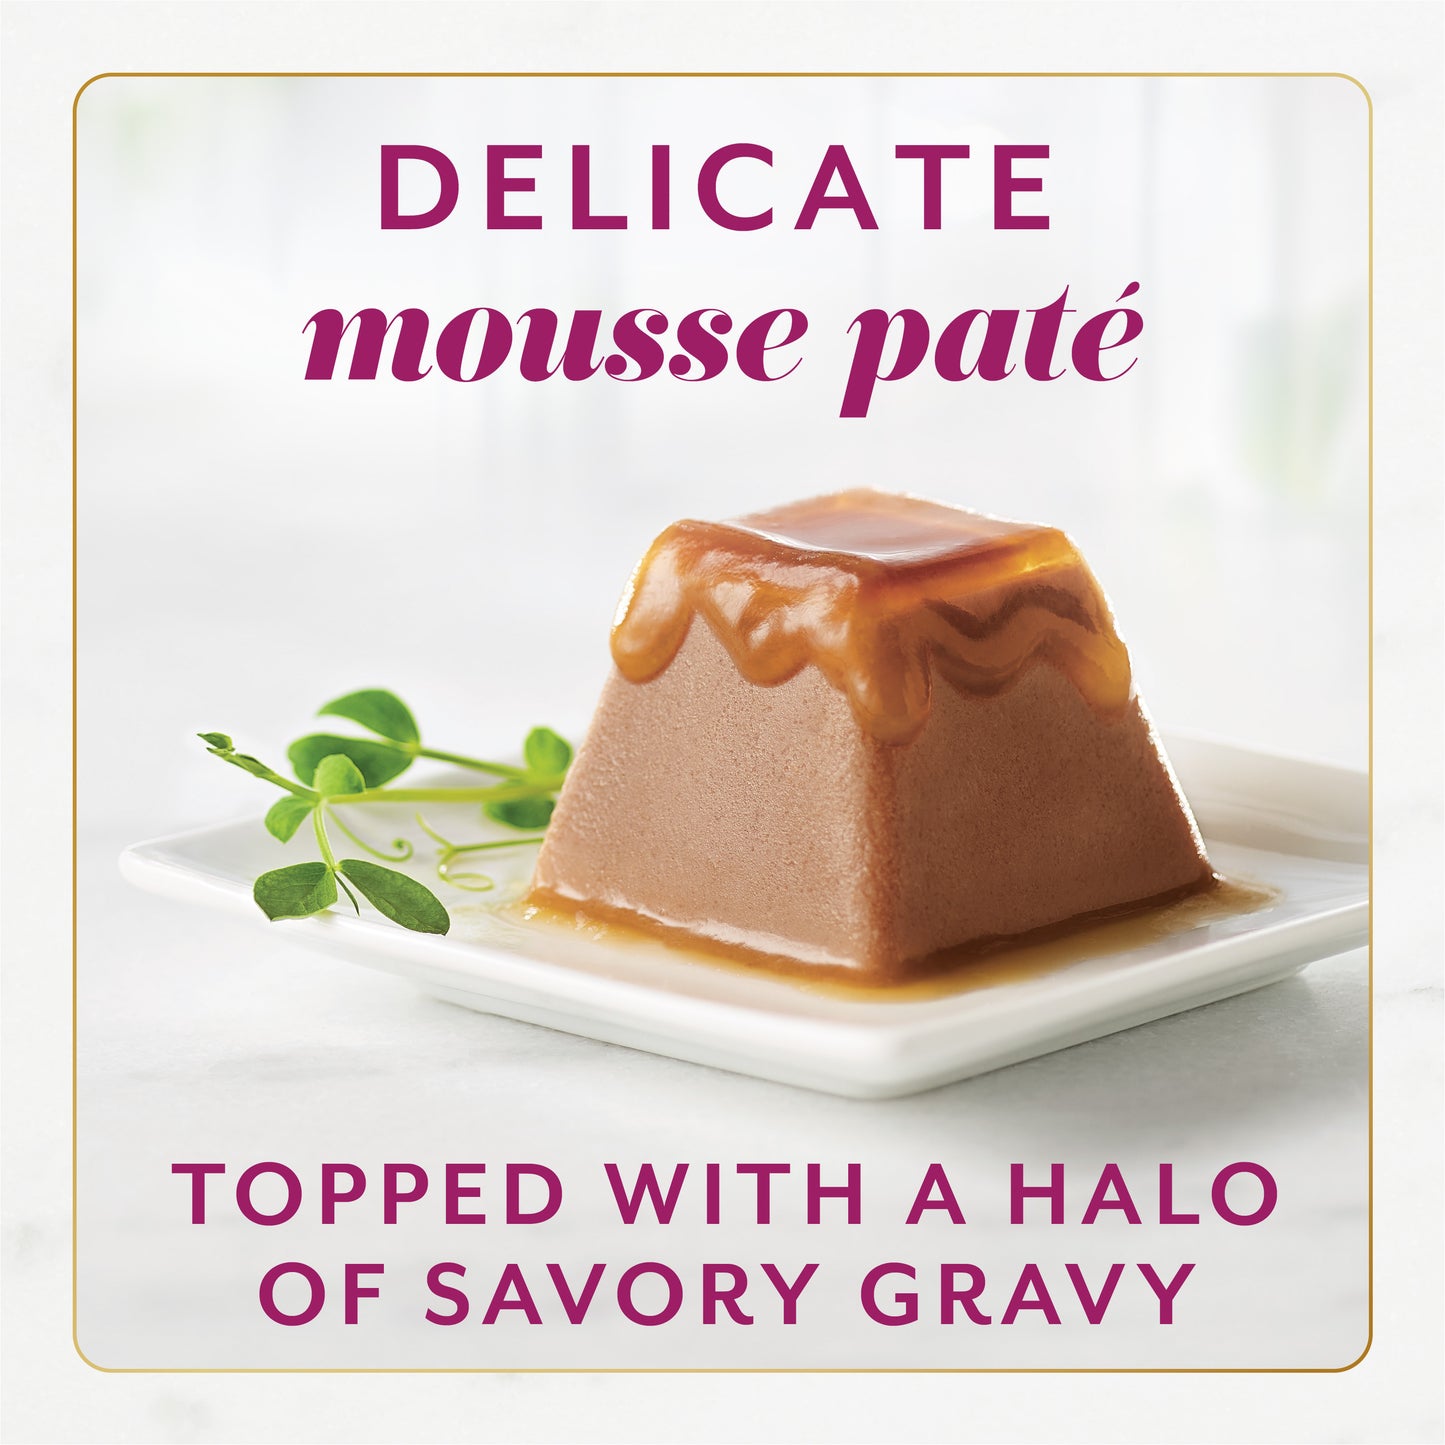 Delicate mousse pate topped with a halo of savory gravy